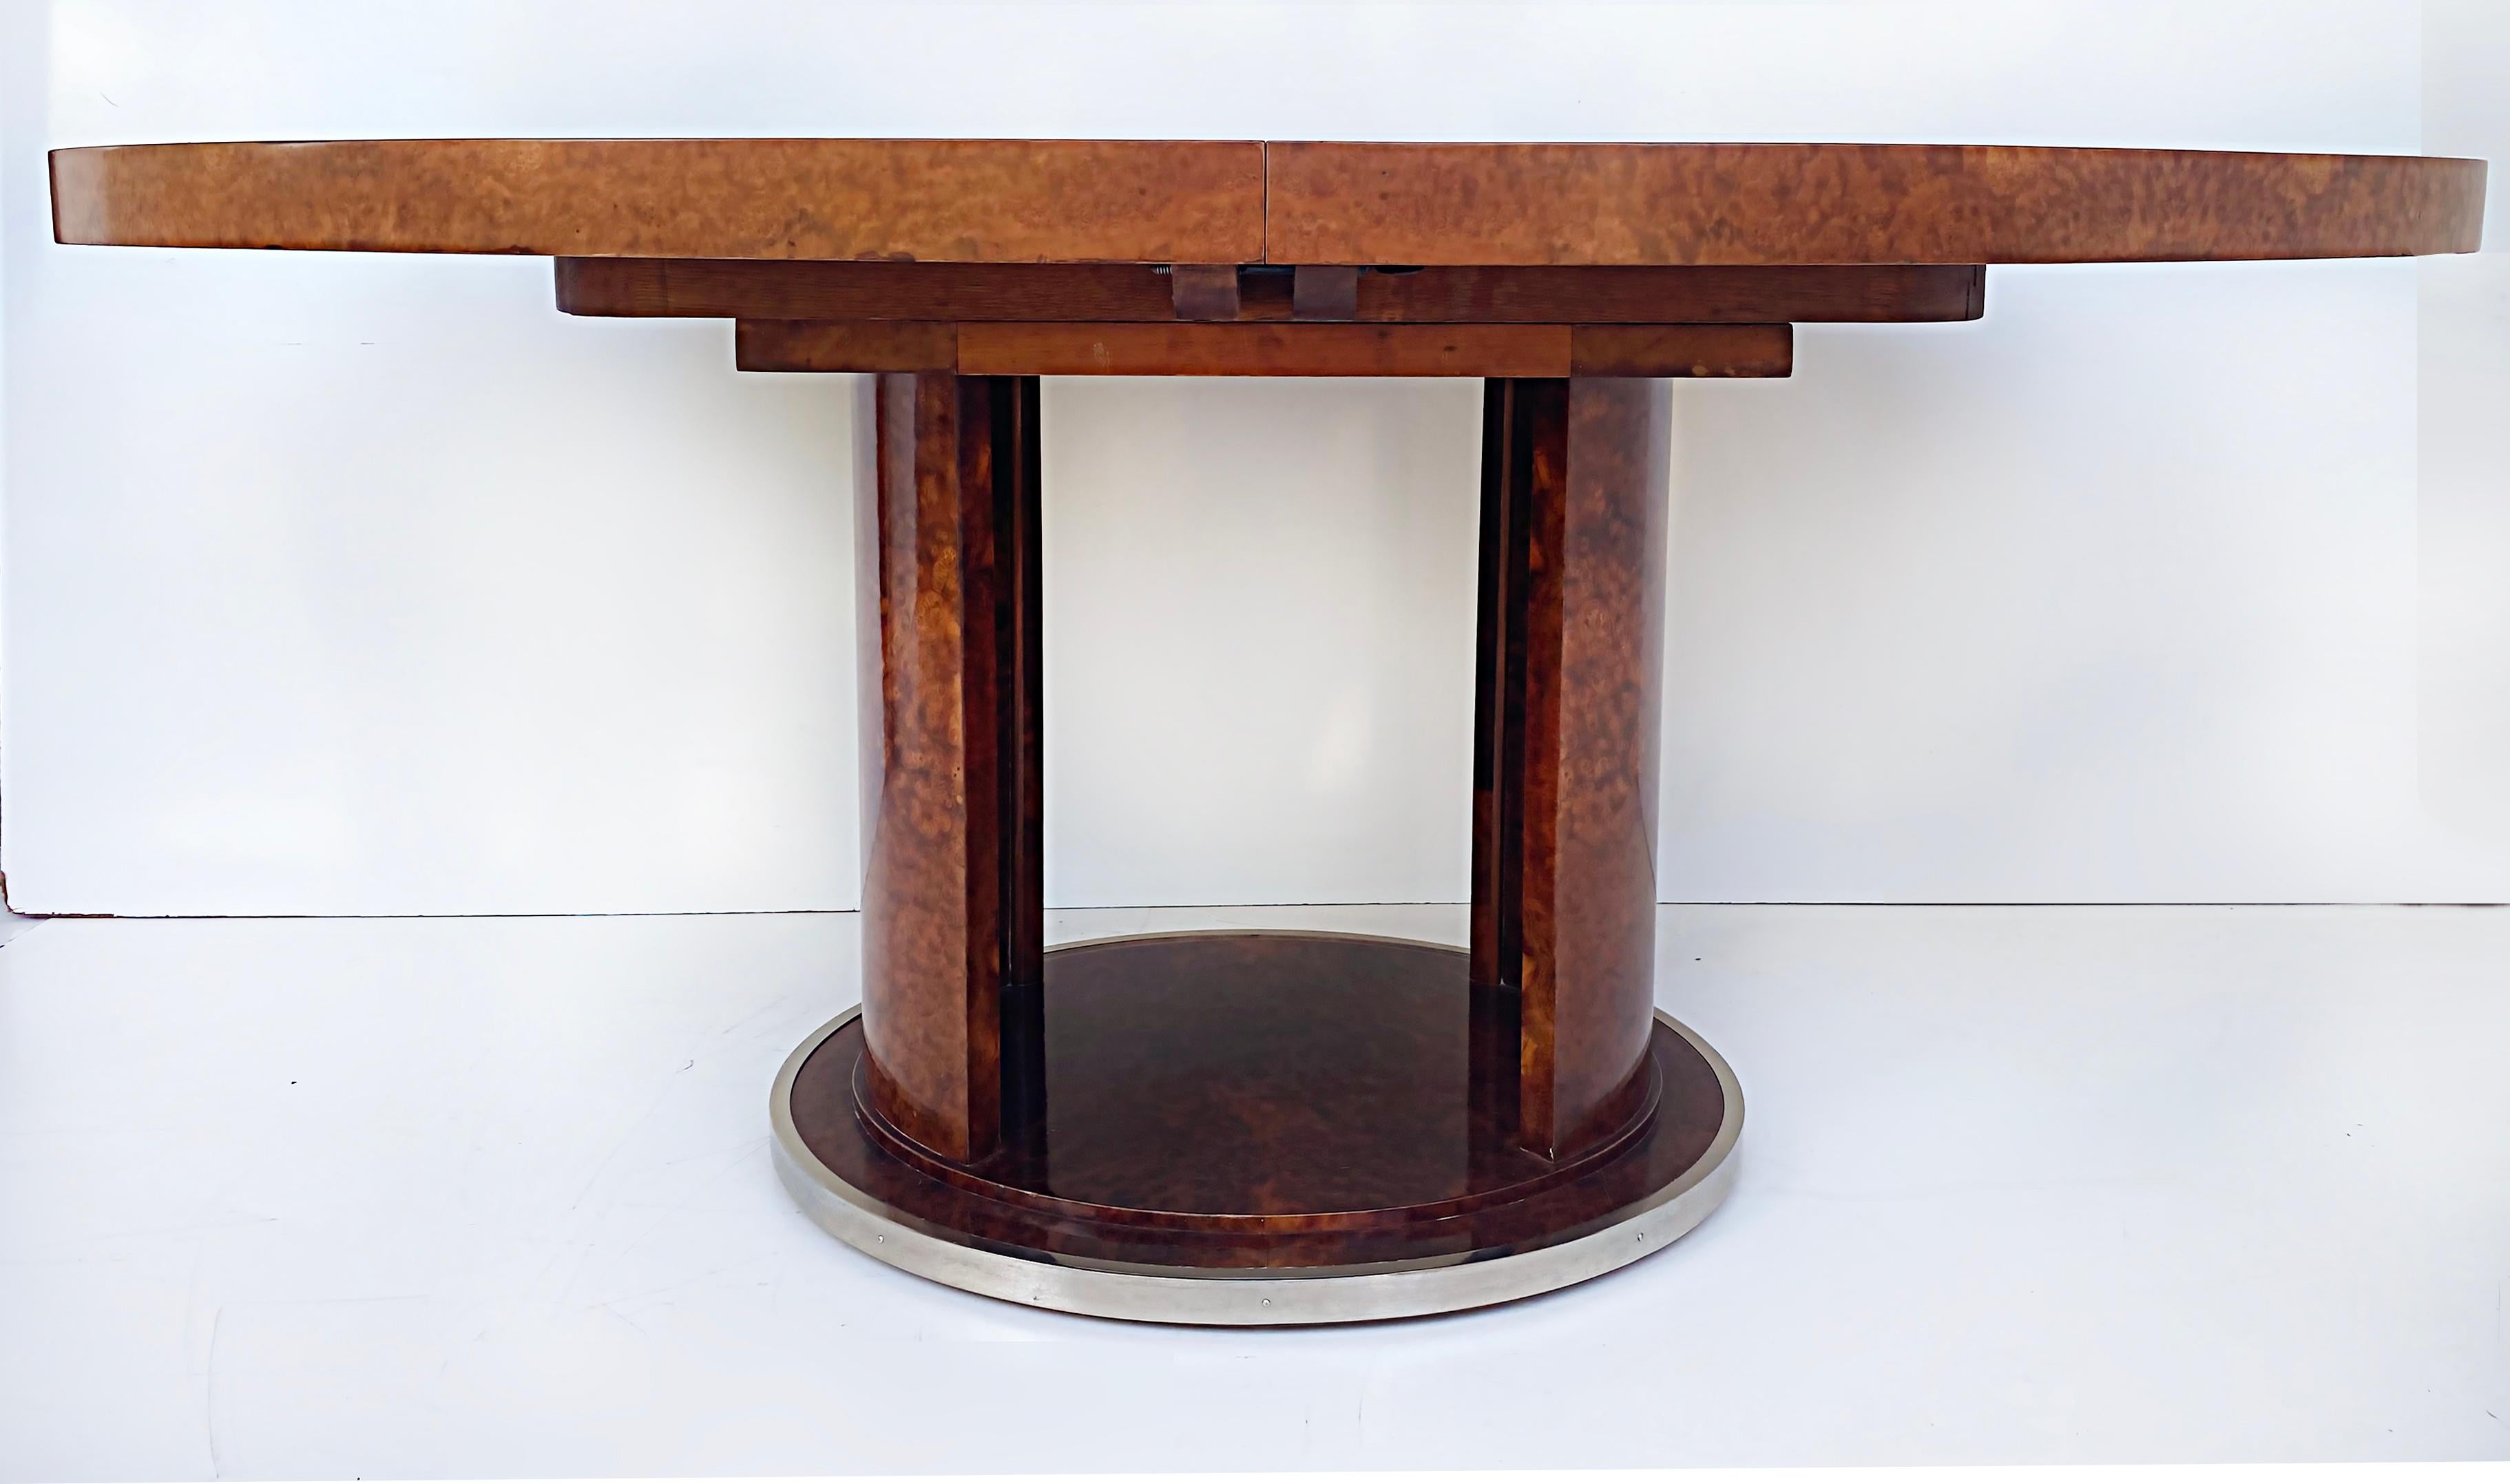 French Art Deco Rinck Paris Burlwood Dining Table 1930s, Extending Oval Pedestal

Offered for sale is a French Art Deco oval extendable dining table marked with the E. Rinck Paris stamp dating and documented to be from the 1930s. This wonderful